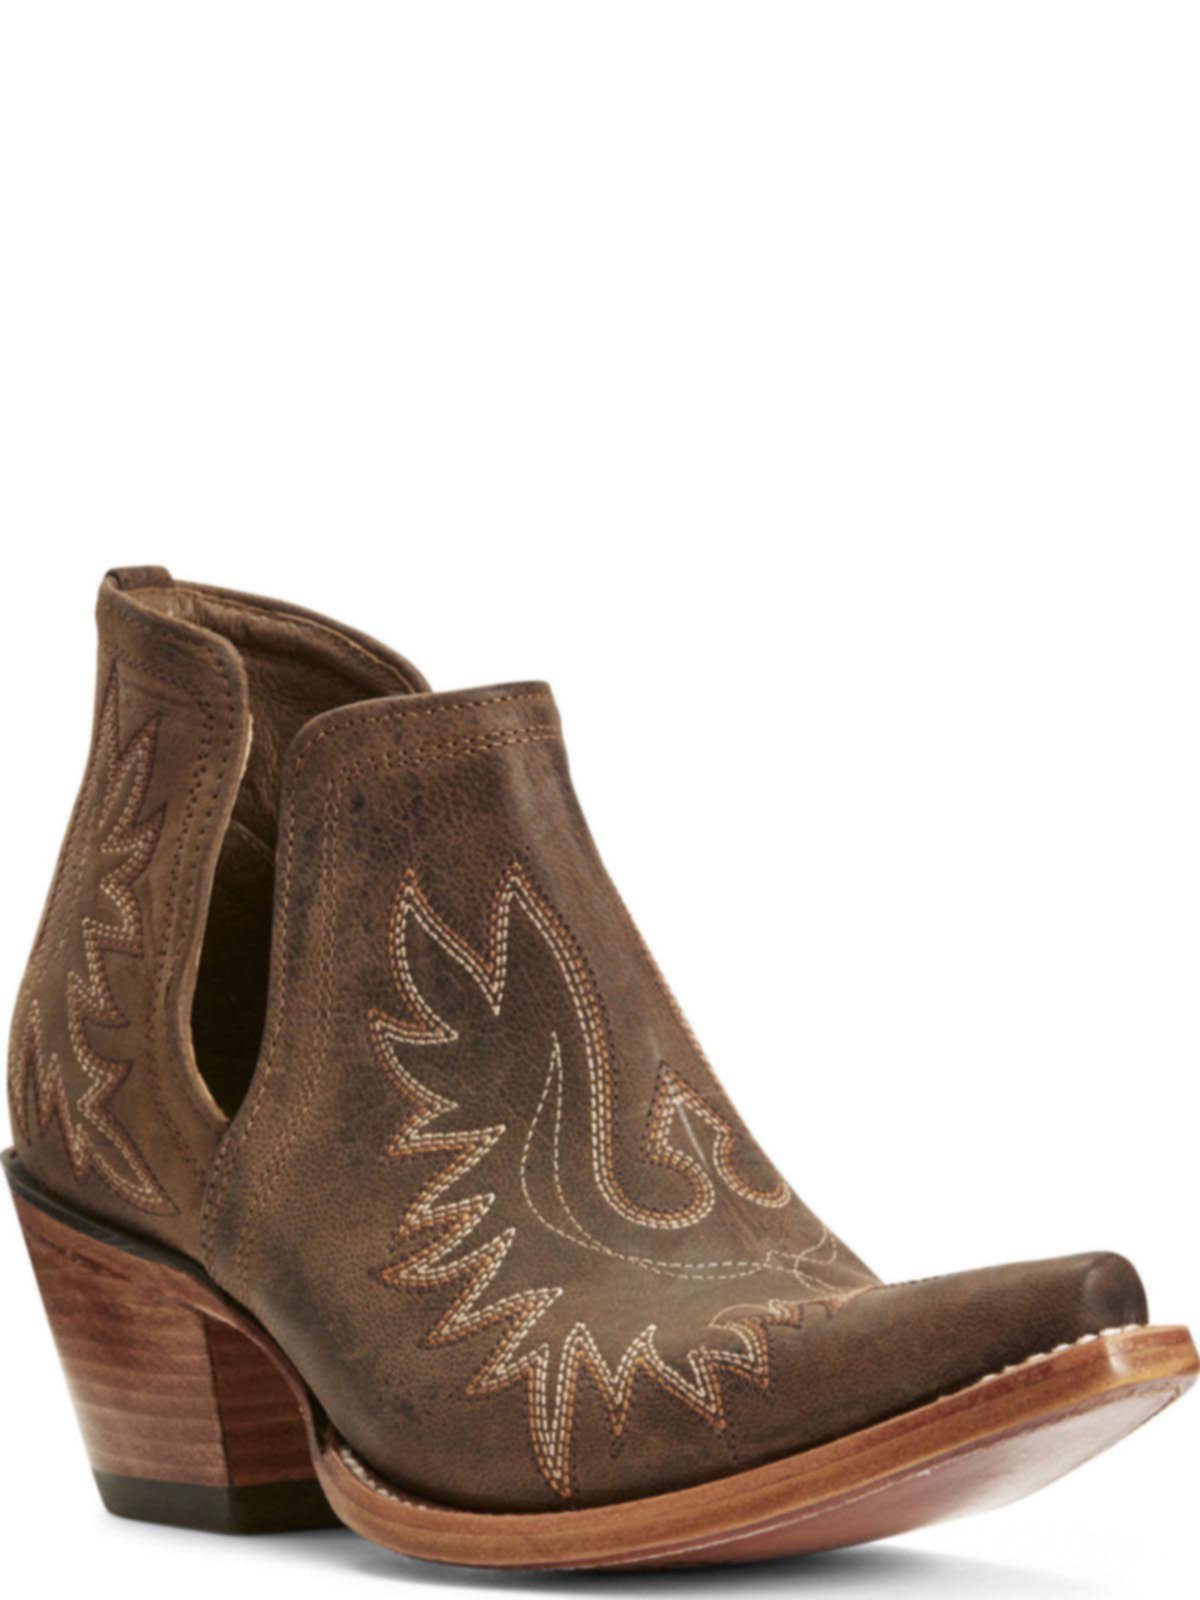 Shop Ariat Womens Dixon Western Ankle Boot 10027282 | Save 20% + Free ...